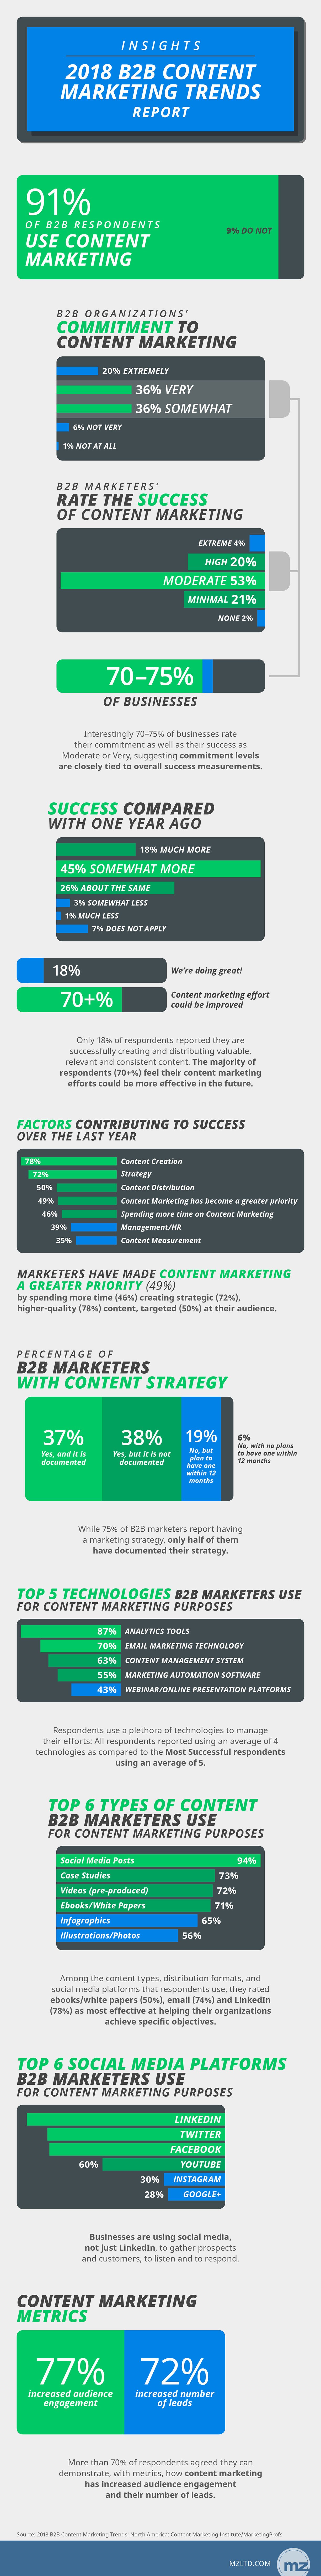 Insights from the 2018 B2B Content Marketing Trends Report